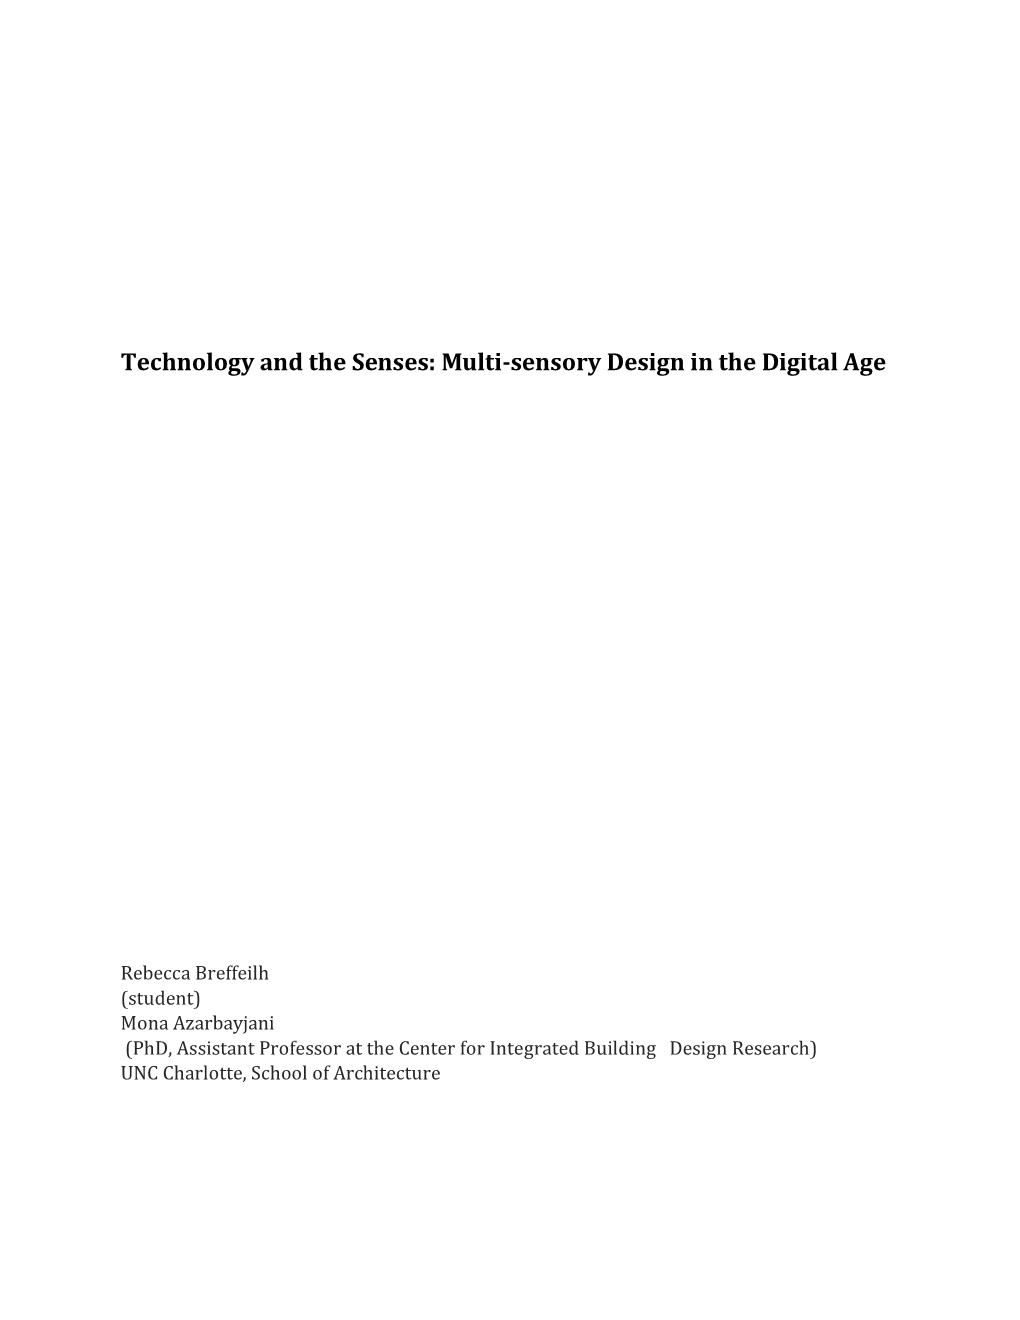 Technology and the Senses: Multi-Sensory Design in the Digital Age